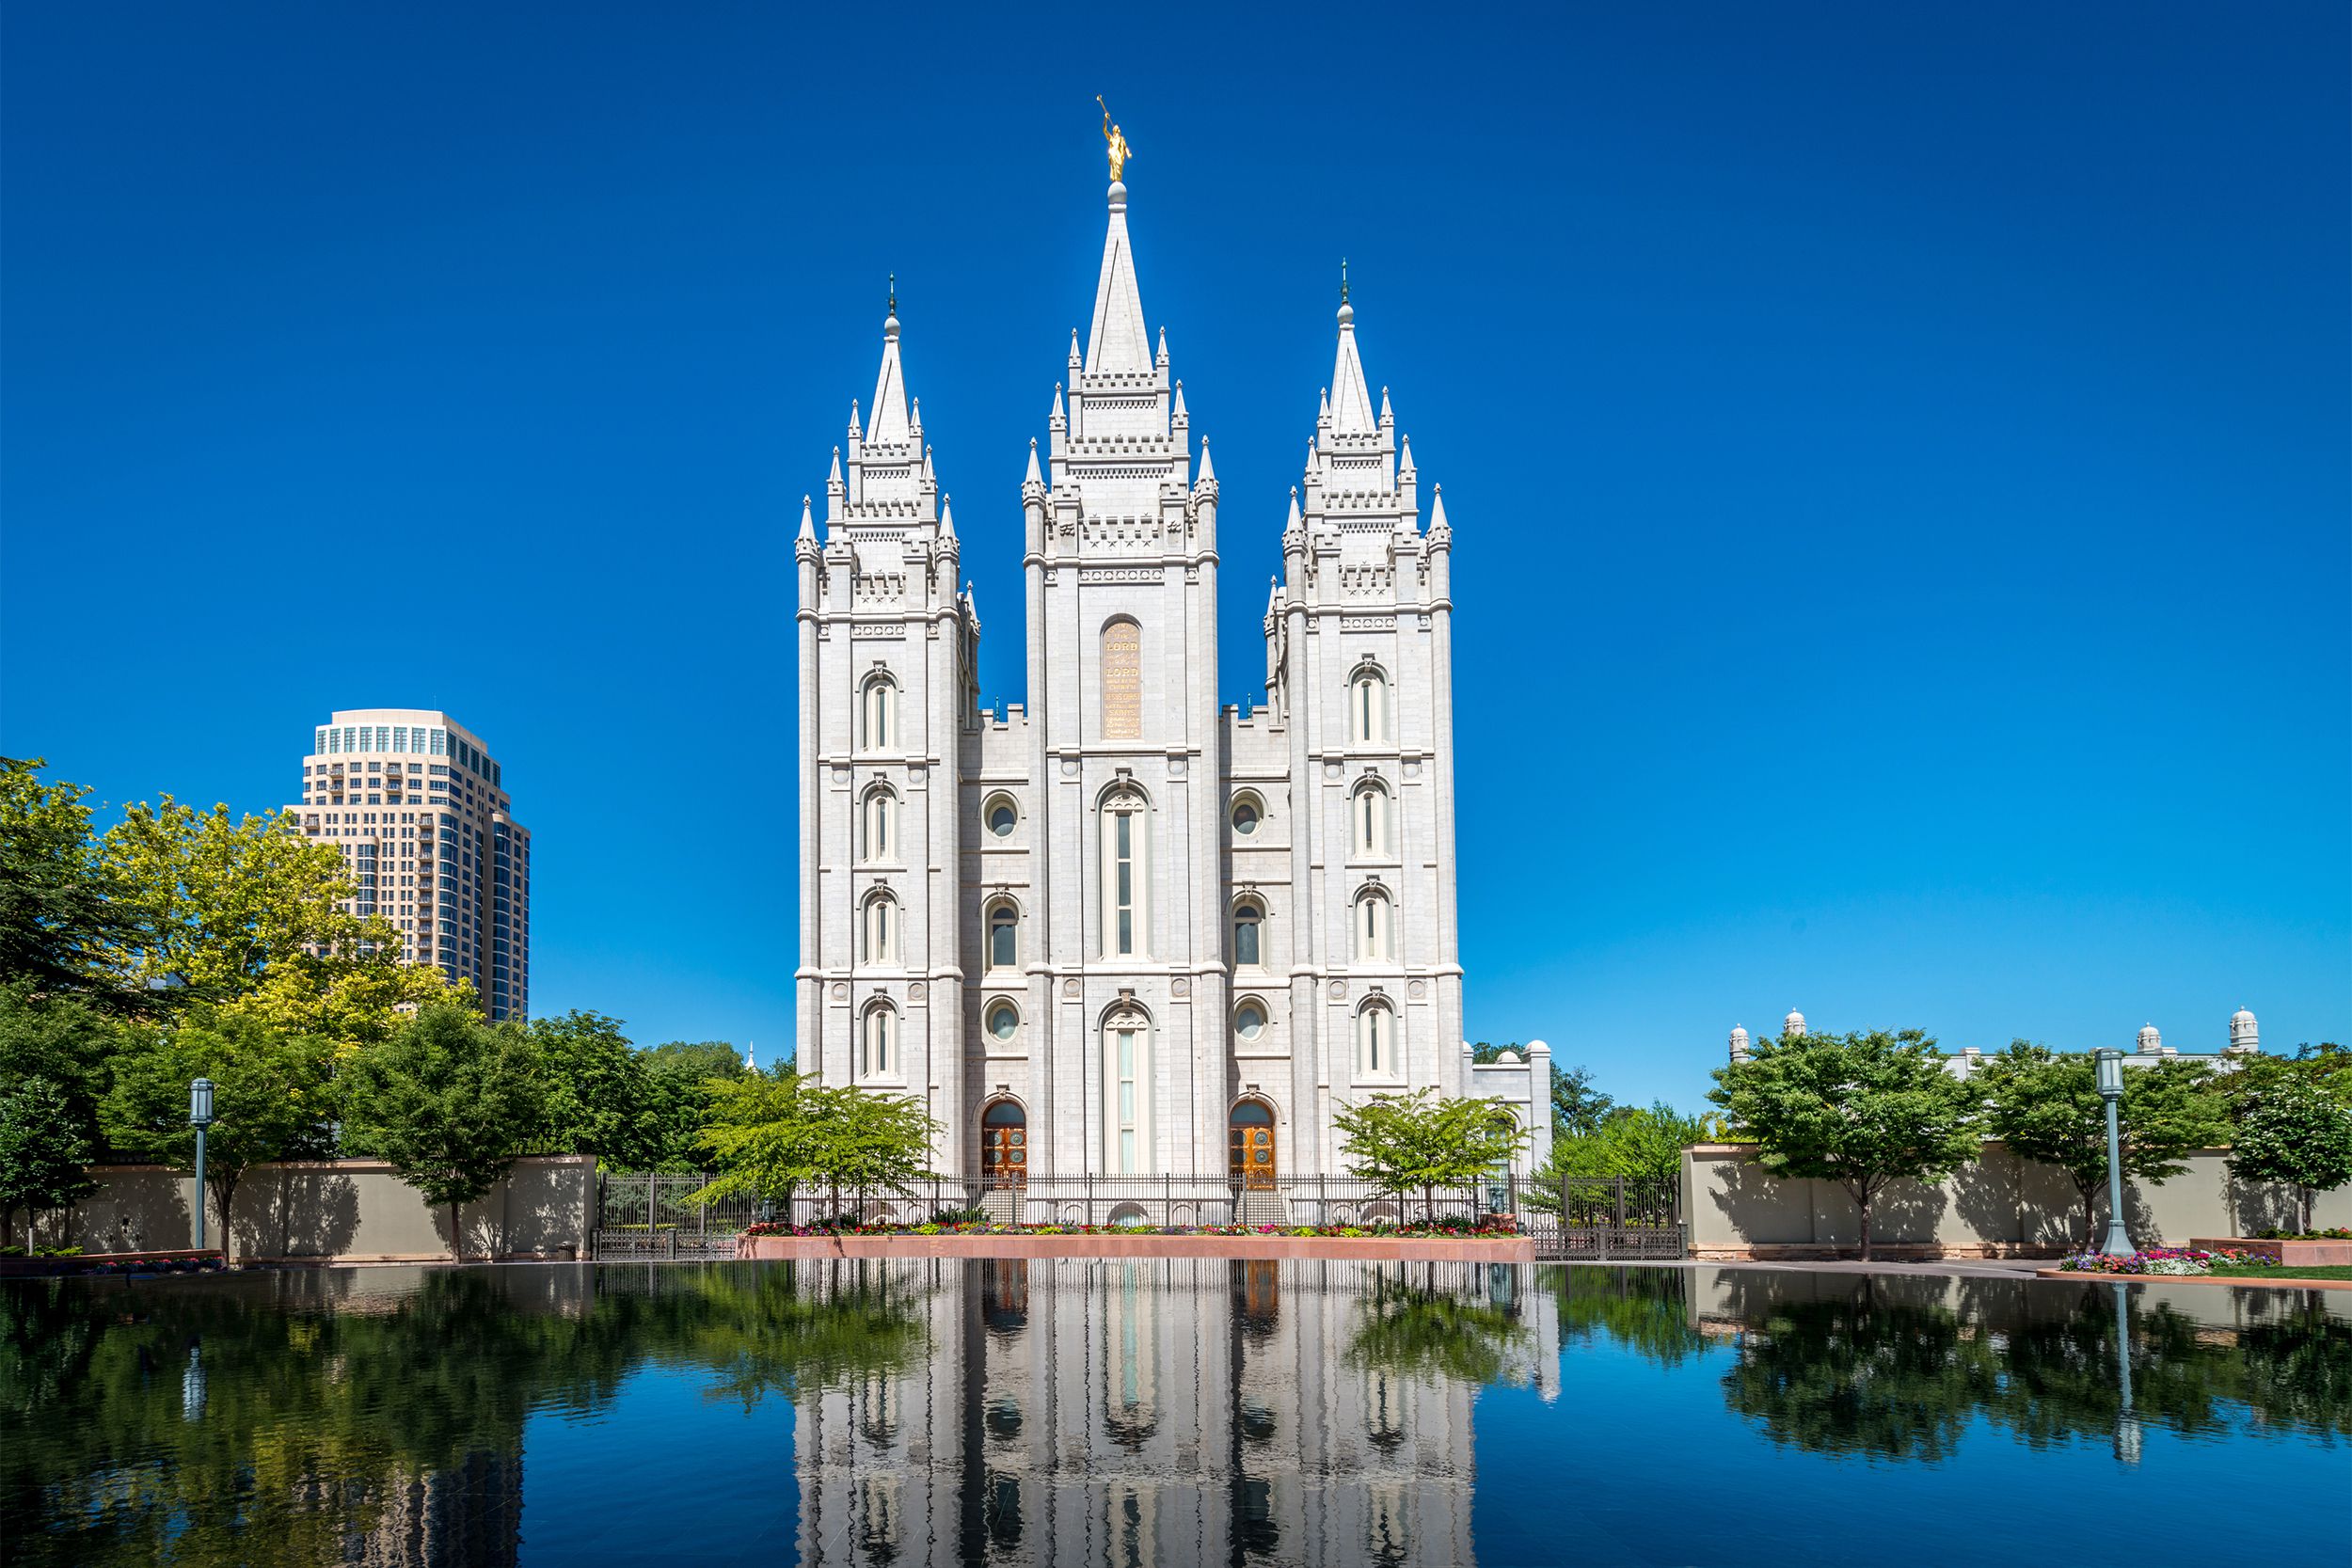 <p>One of the most scenic places to behold in Utah is Temple Square. Although non-Mormons aren't permitted inside the Salt Lake Temple, the imposing building makes for an irresistible photo opportunity. The Tabernacle is home to the famous Tabernacle Choir at Temple Square (until recently known as the Mormon Tabernacle Choir). </p><p><b>Related:</b> <a href="https://blog.cheapism.com/must-see-architecture-in-america/">America's Most Iconic Buildings and Monuments</a></p>